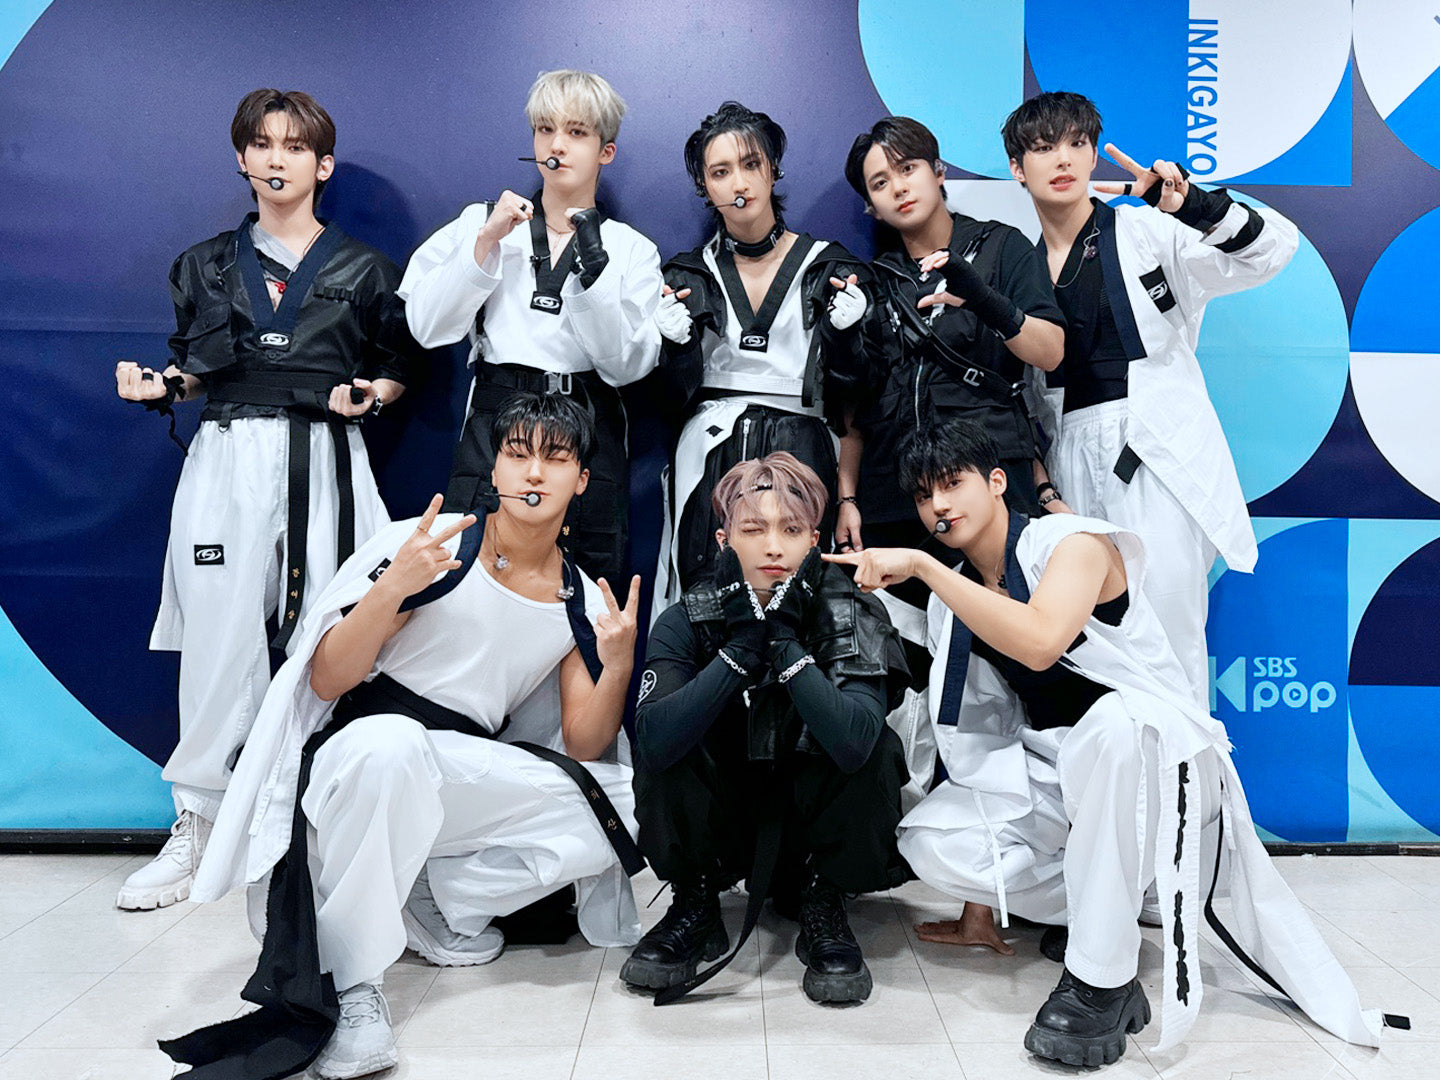 [Kpop Planet News] ATEEZ Clinch Their First No.1 On Billboard 200 Albums Chart